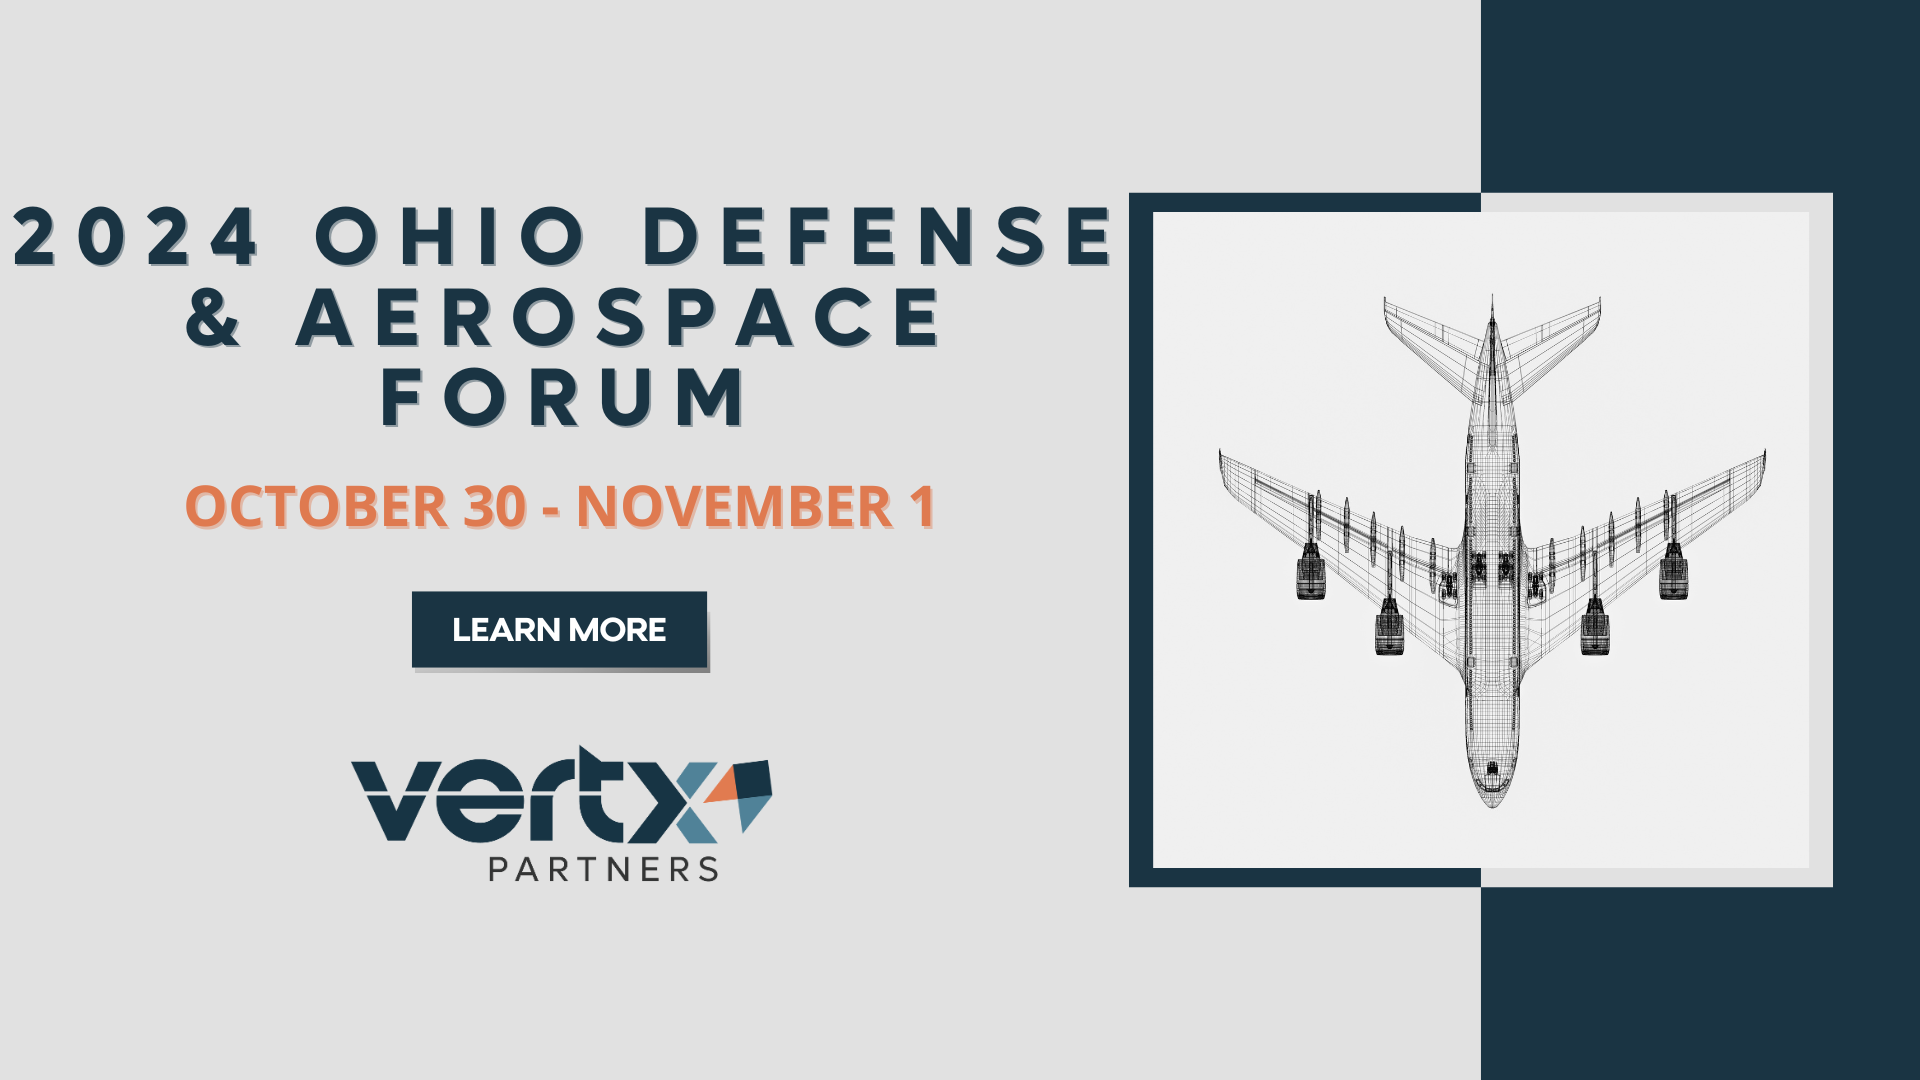 This graphic has the title 2024 Ohio Defense & Aerospace Forum with the dates october 30 - november 1 and a photo of a plane that has been drawn to the right of it